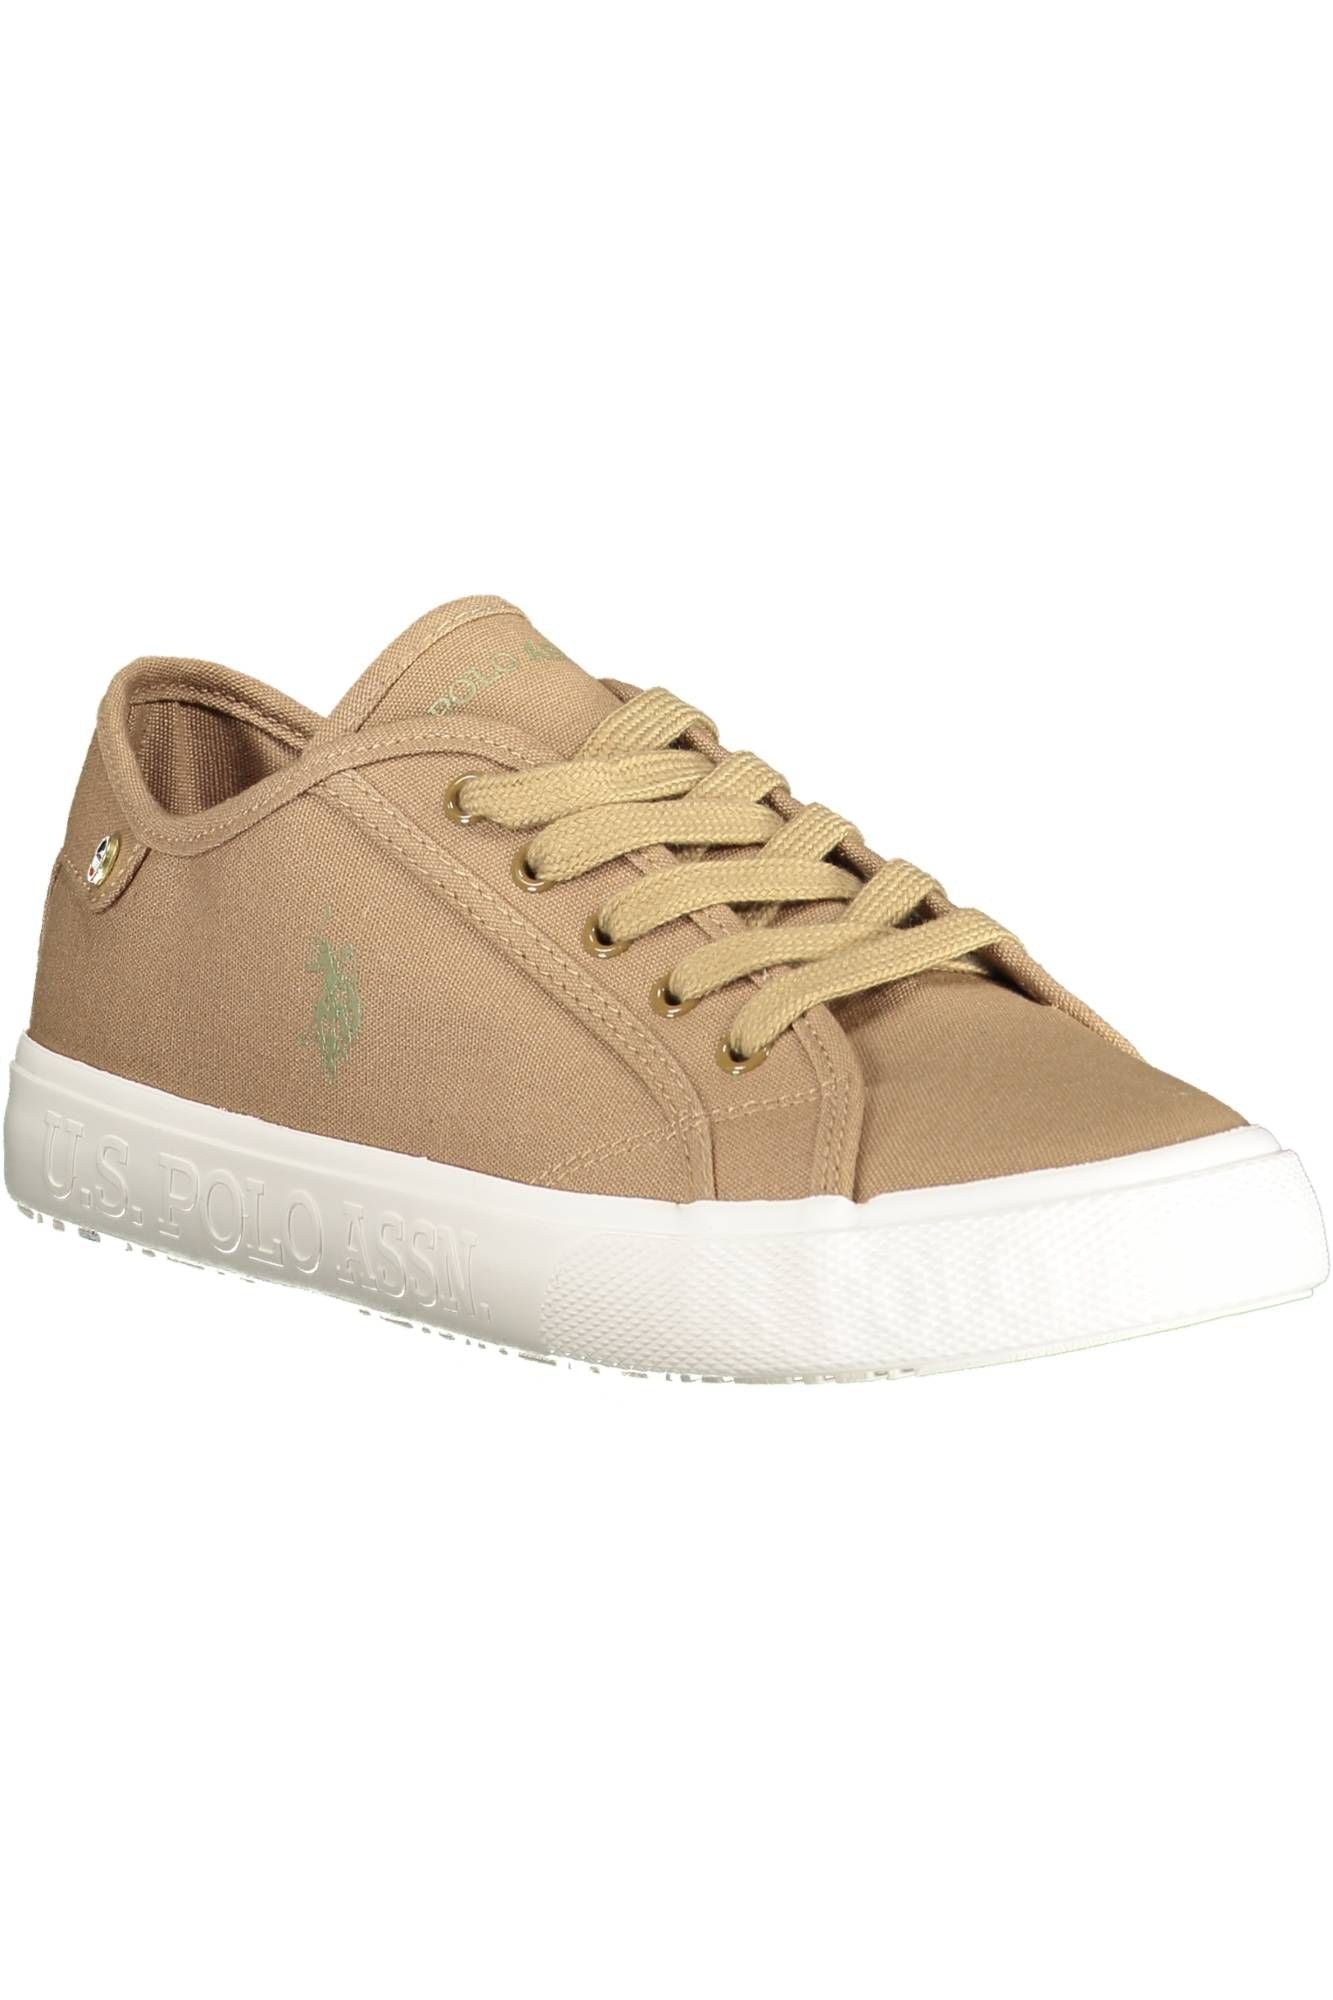 U.S. POLO ASSN. Chic Brown Lace-Up Sporty Sneakers